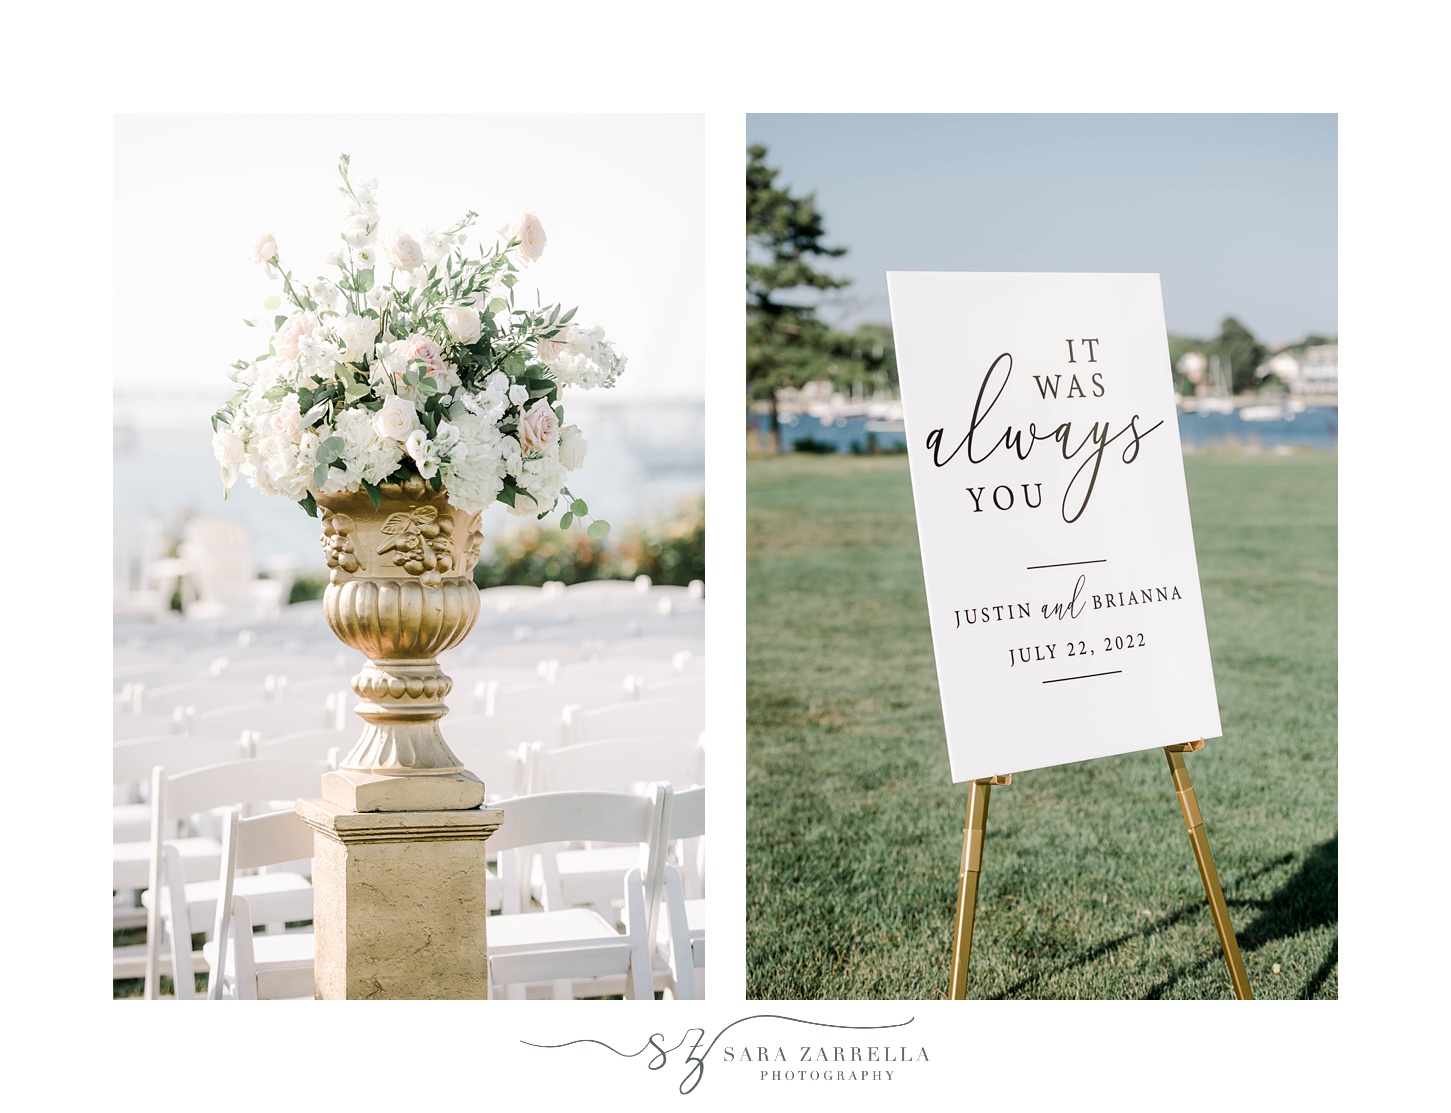 ceremony details and welcome sign at Gurney’s Newport Resort